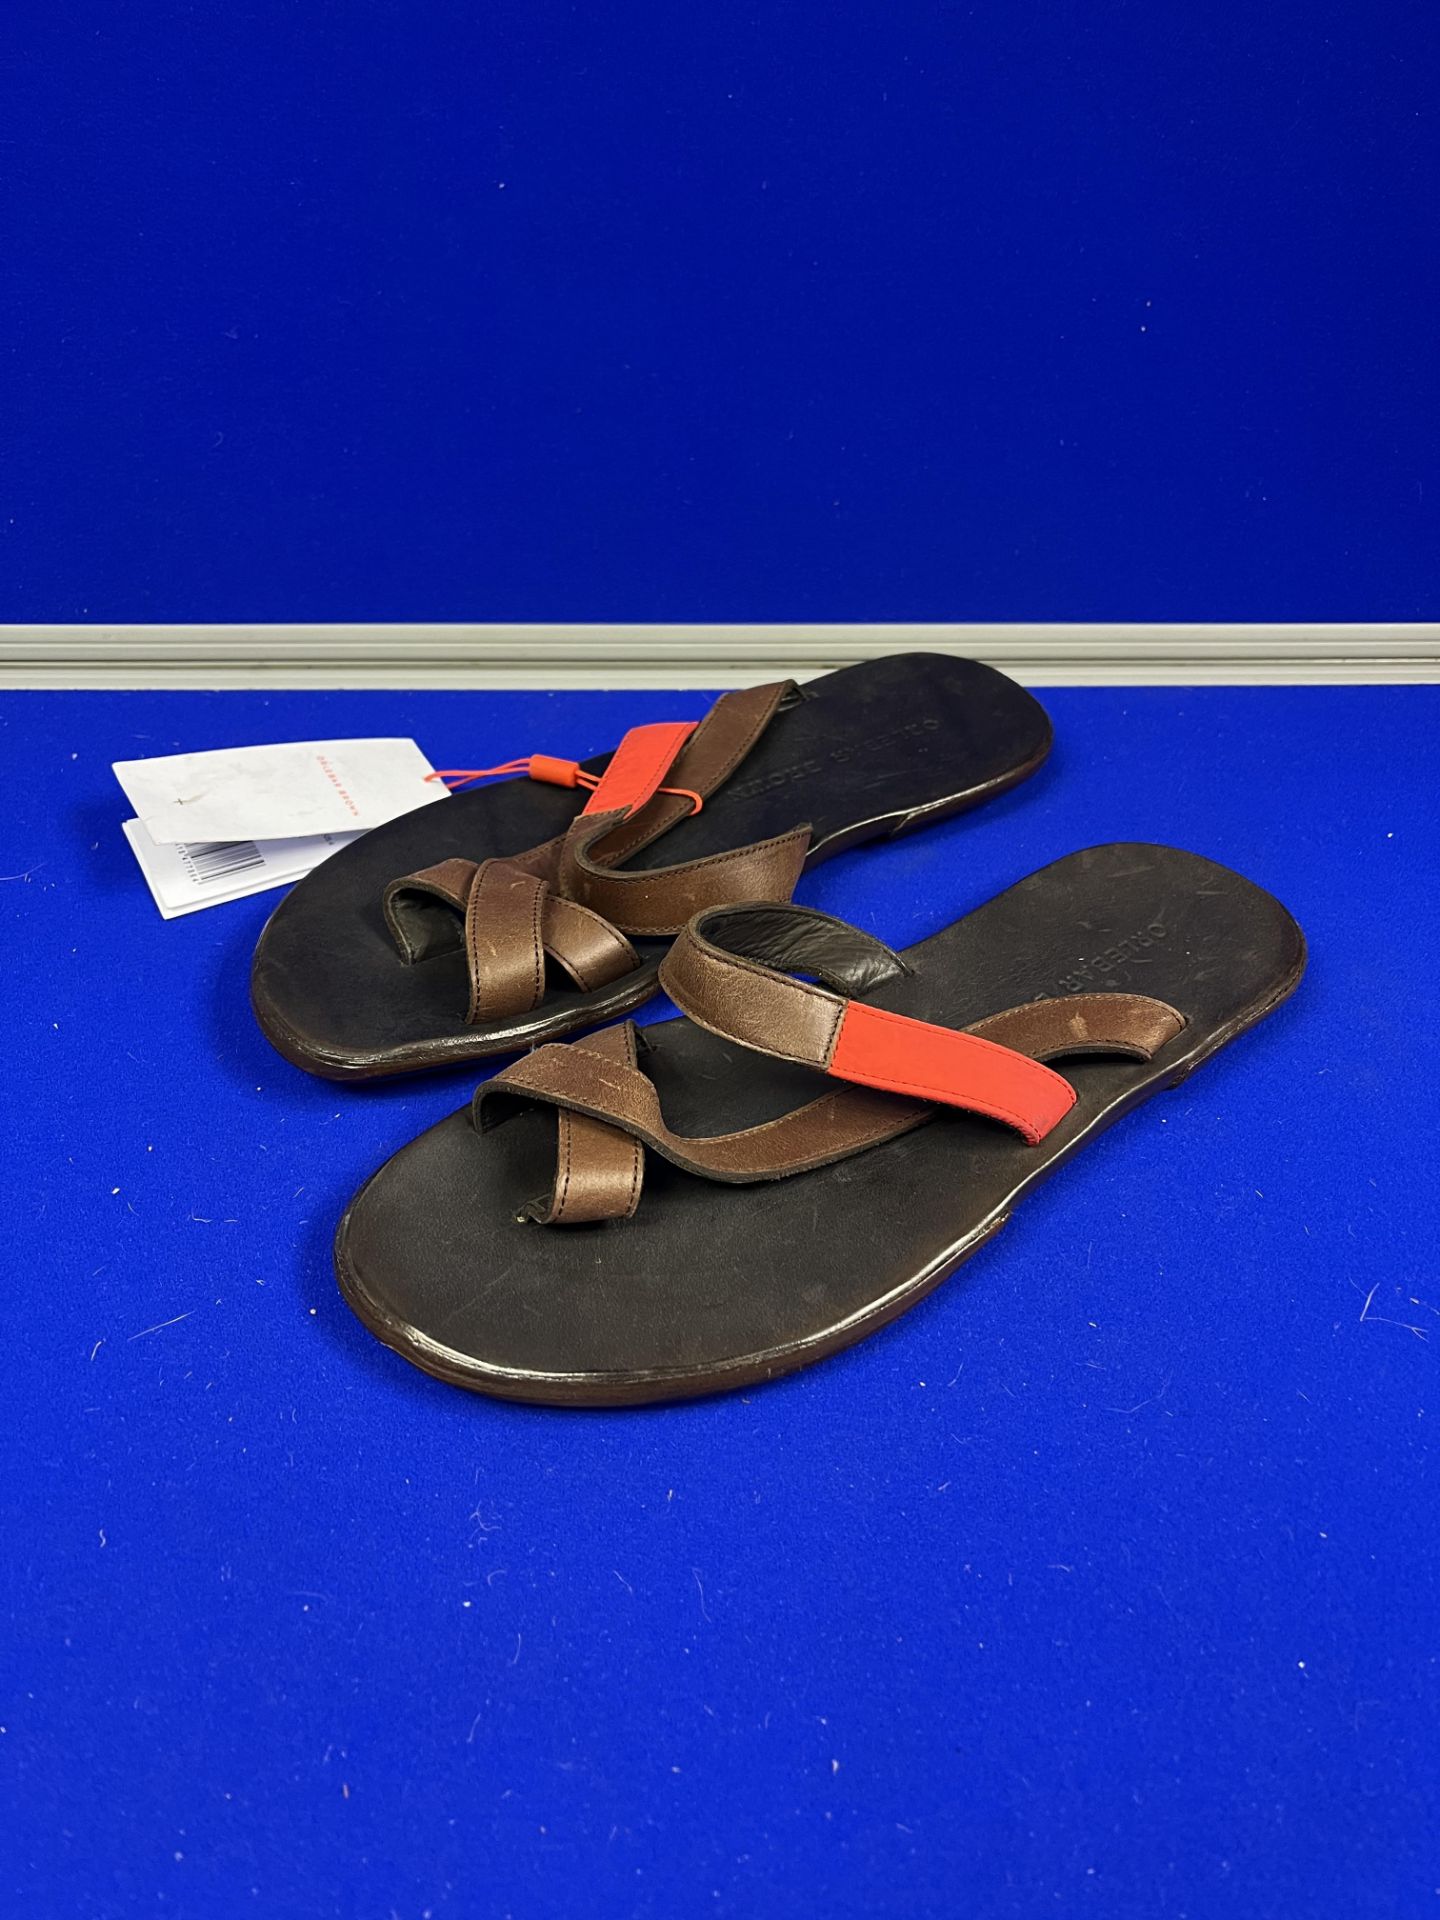 4 x Pairs of Orlebar Brown Sandals - Image 4 of 5